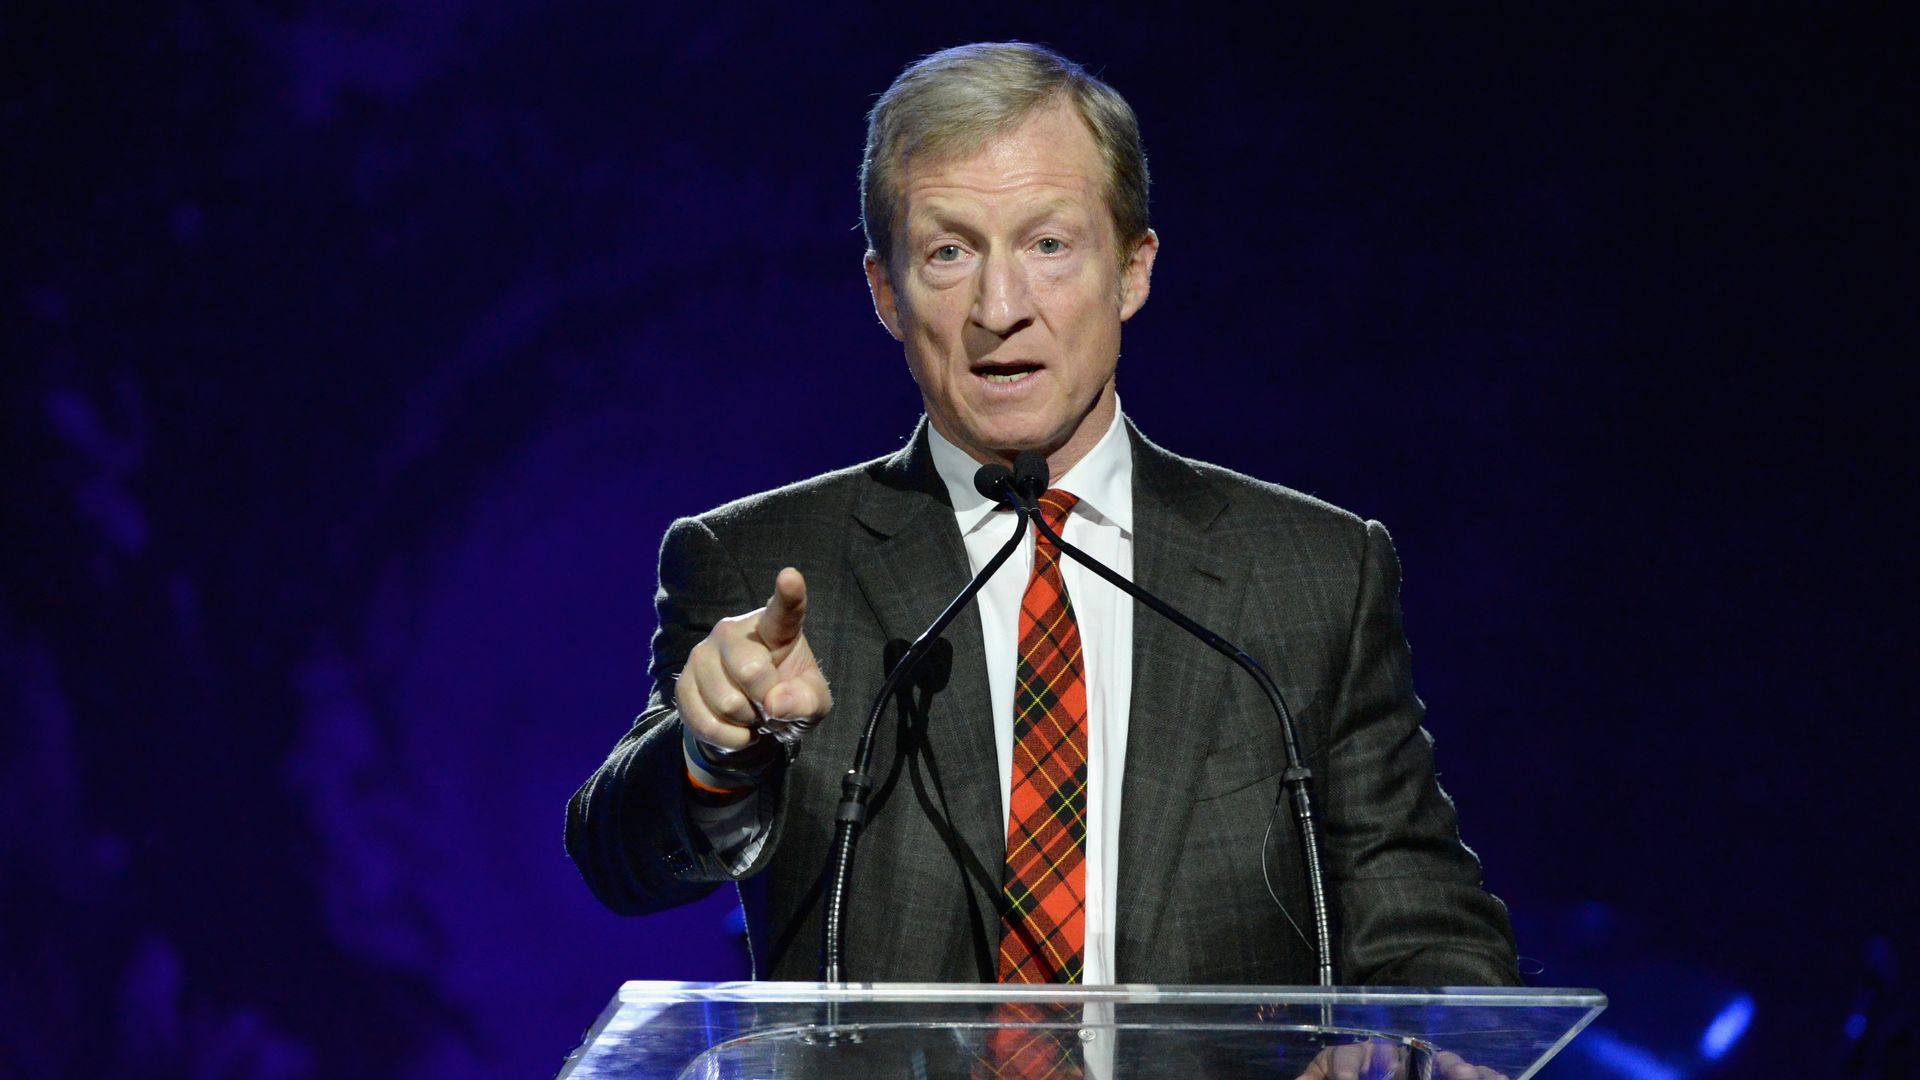 Tom Steyer points on stage while speaking to an audience